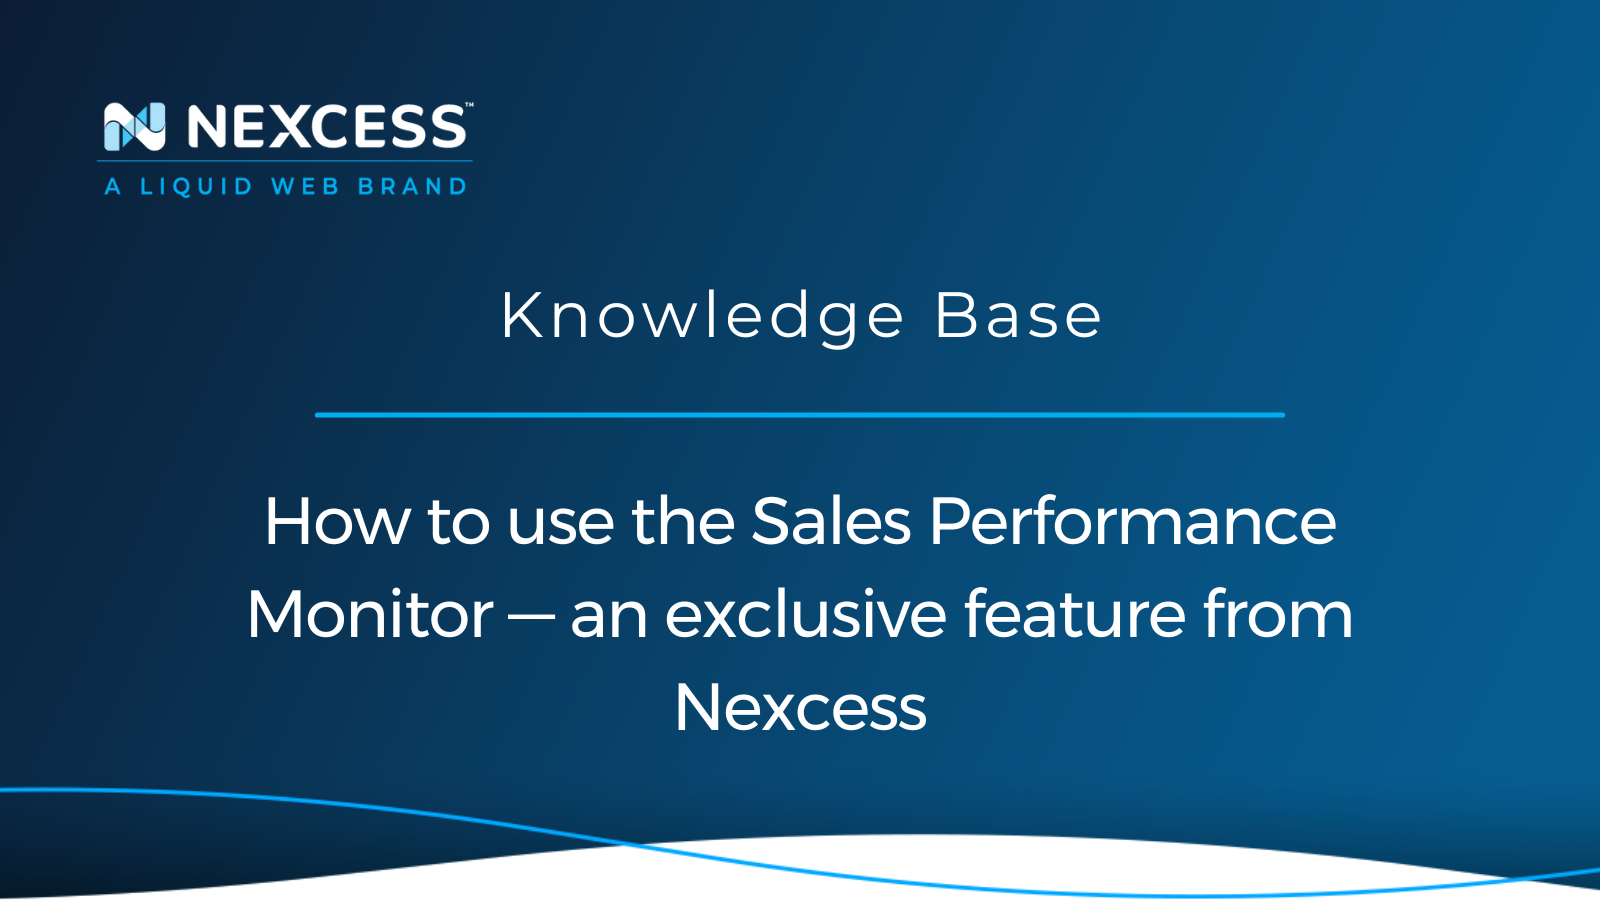 How to use the Sales Performance Monitor — an exclusive feature from Nexcess